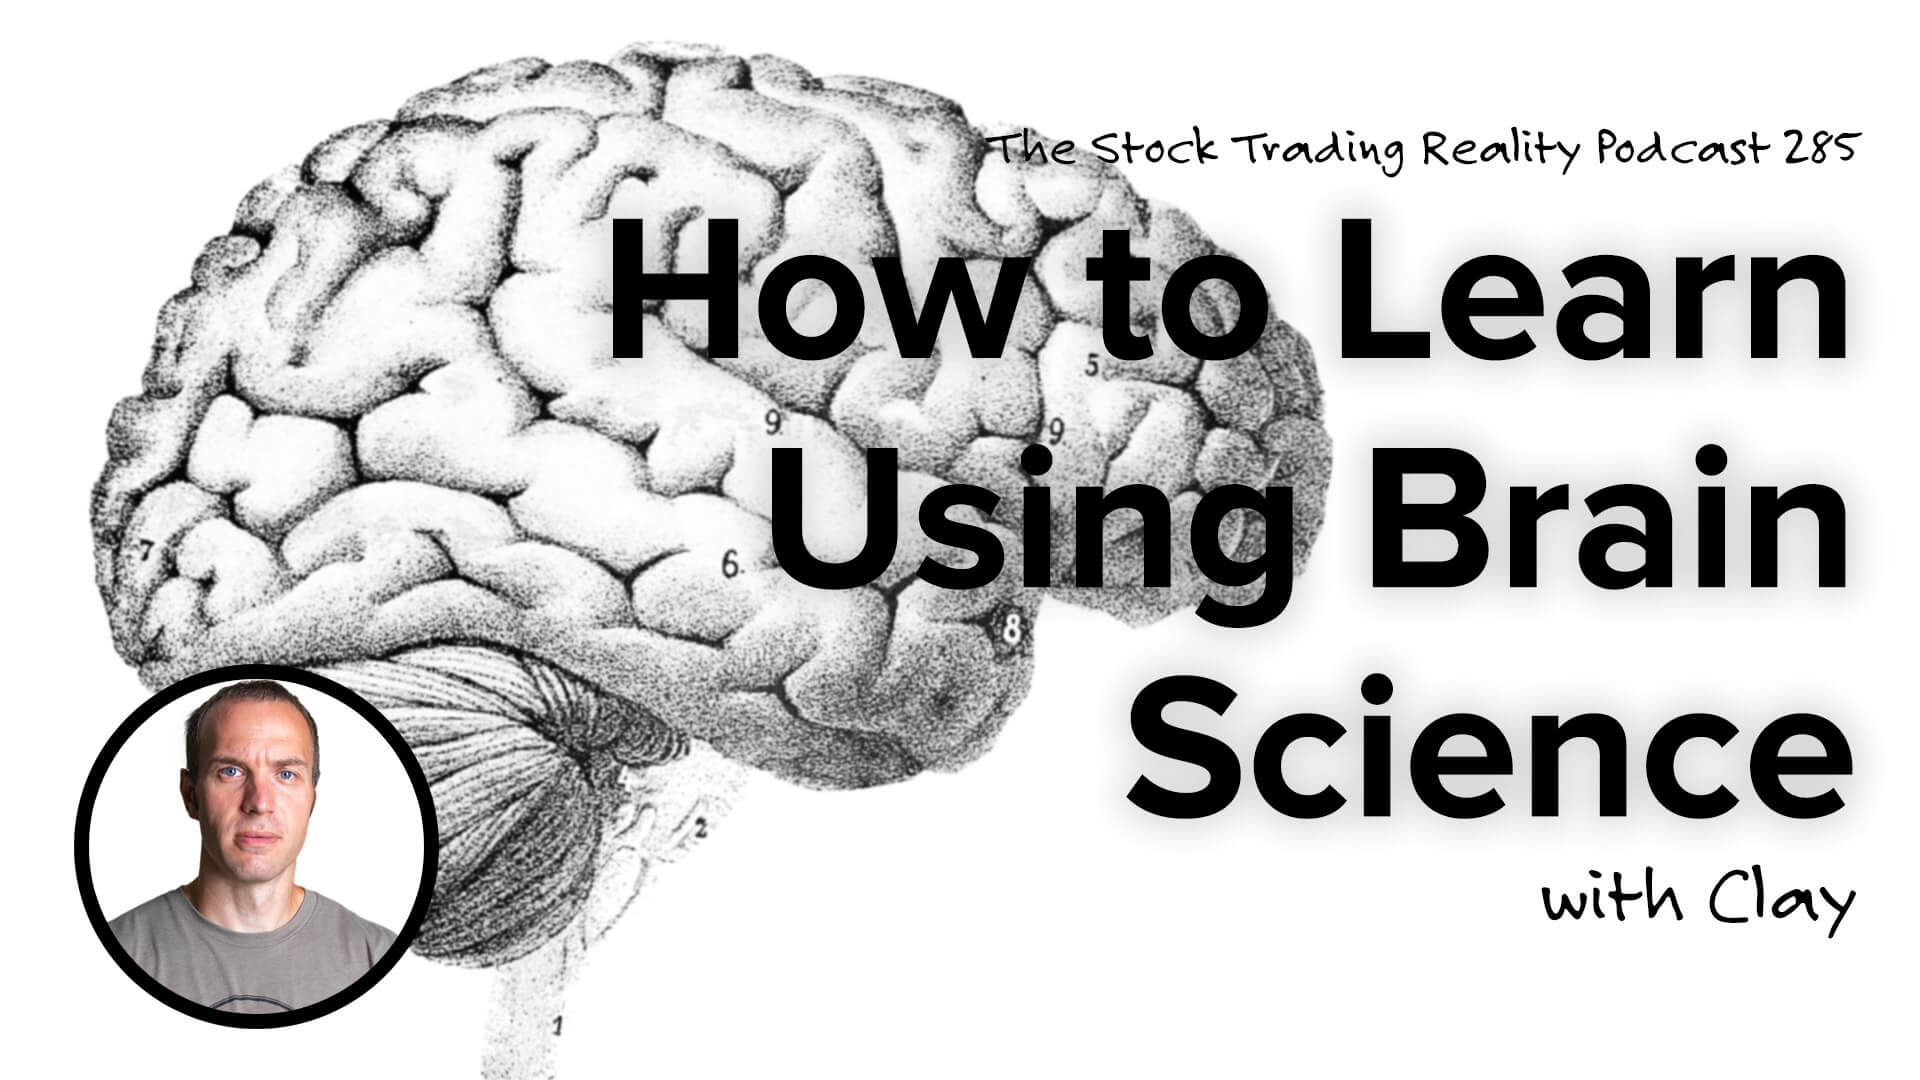 How to Learn Using Brain Science | STR 285